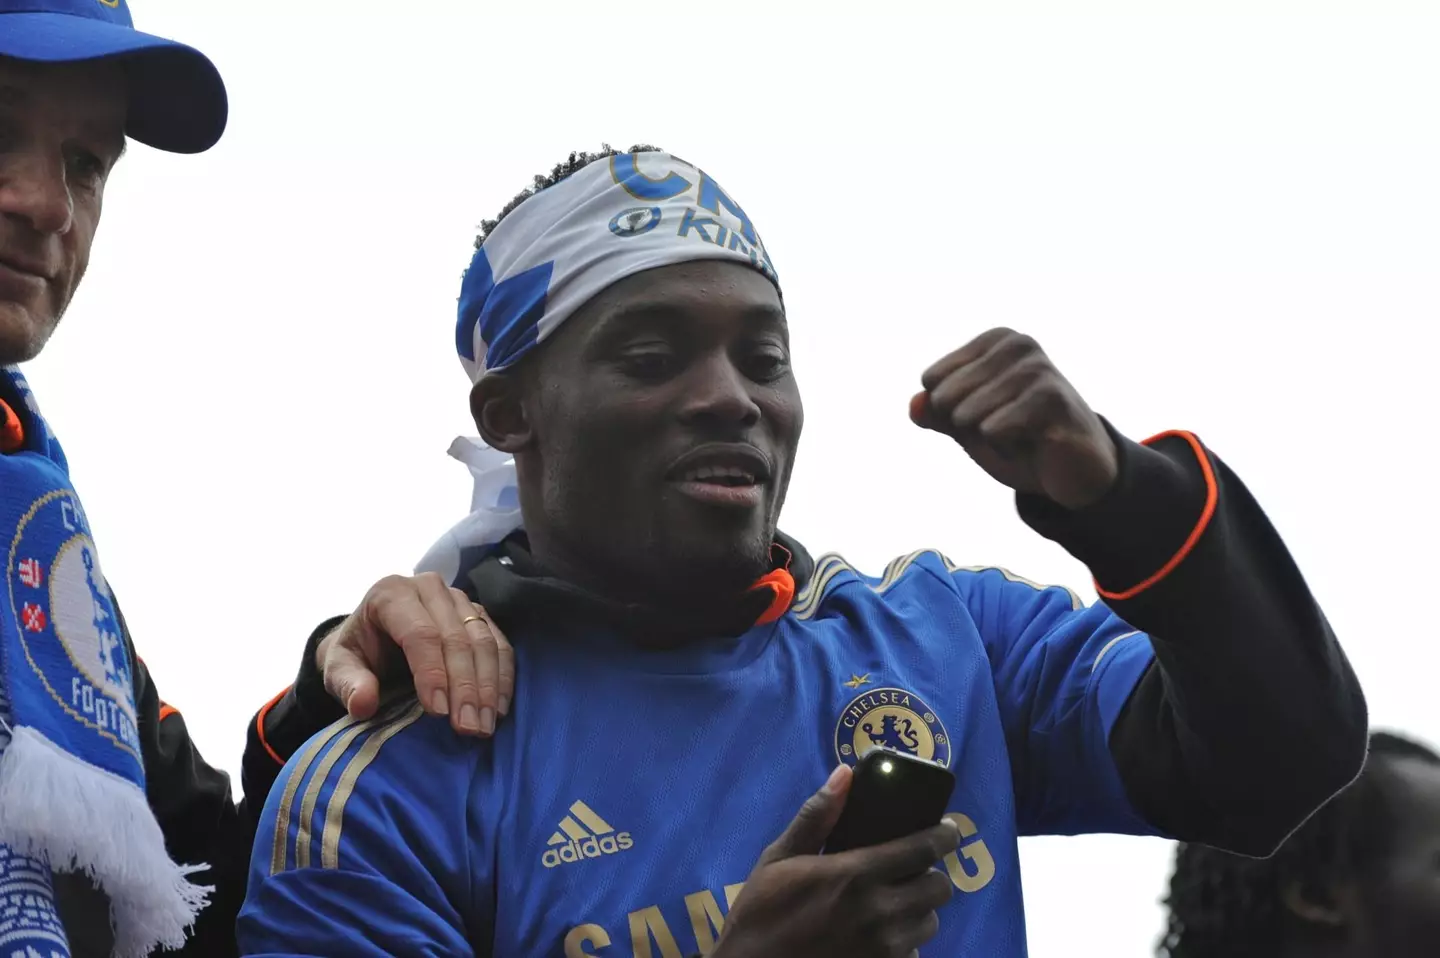 Michael Essien lifted two Premier League titles, a Champions League, four FA Cups and a League Cup at Chelsea.